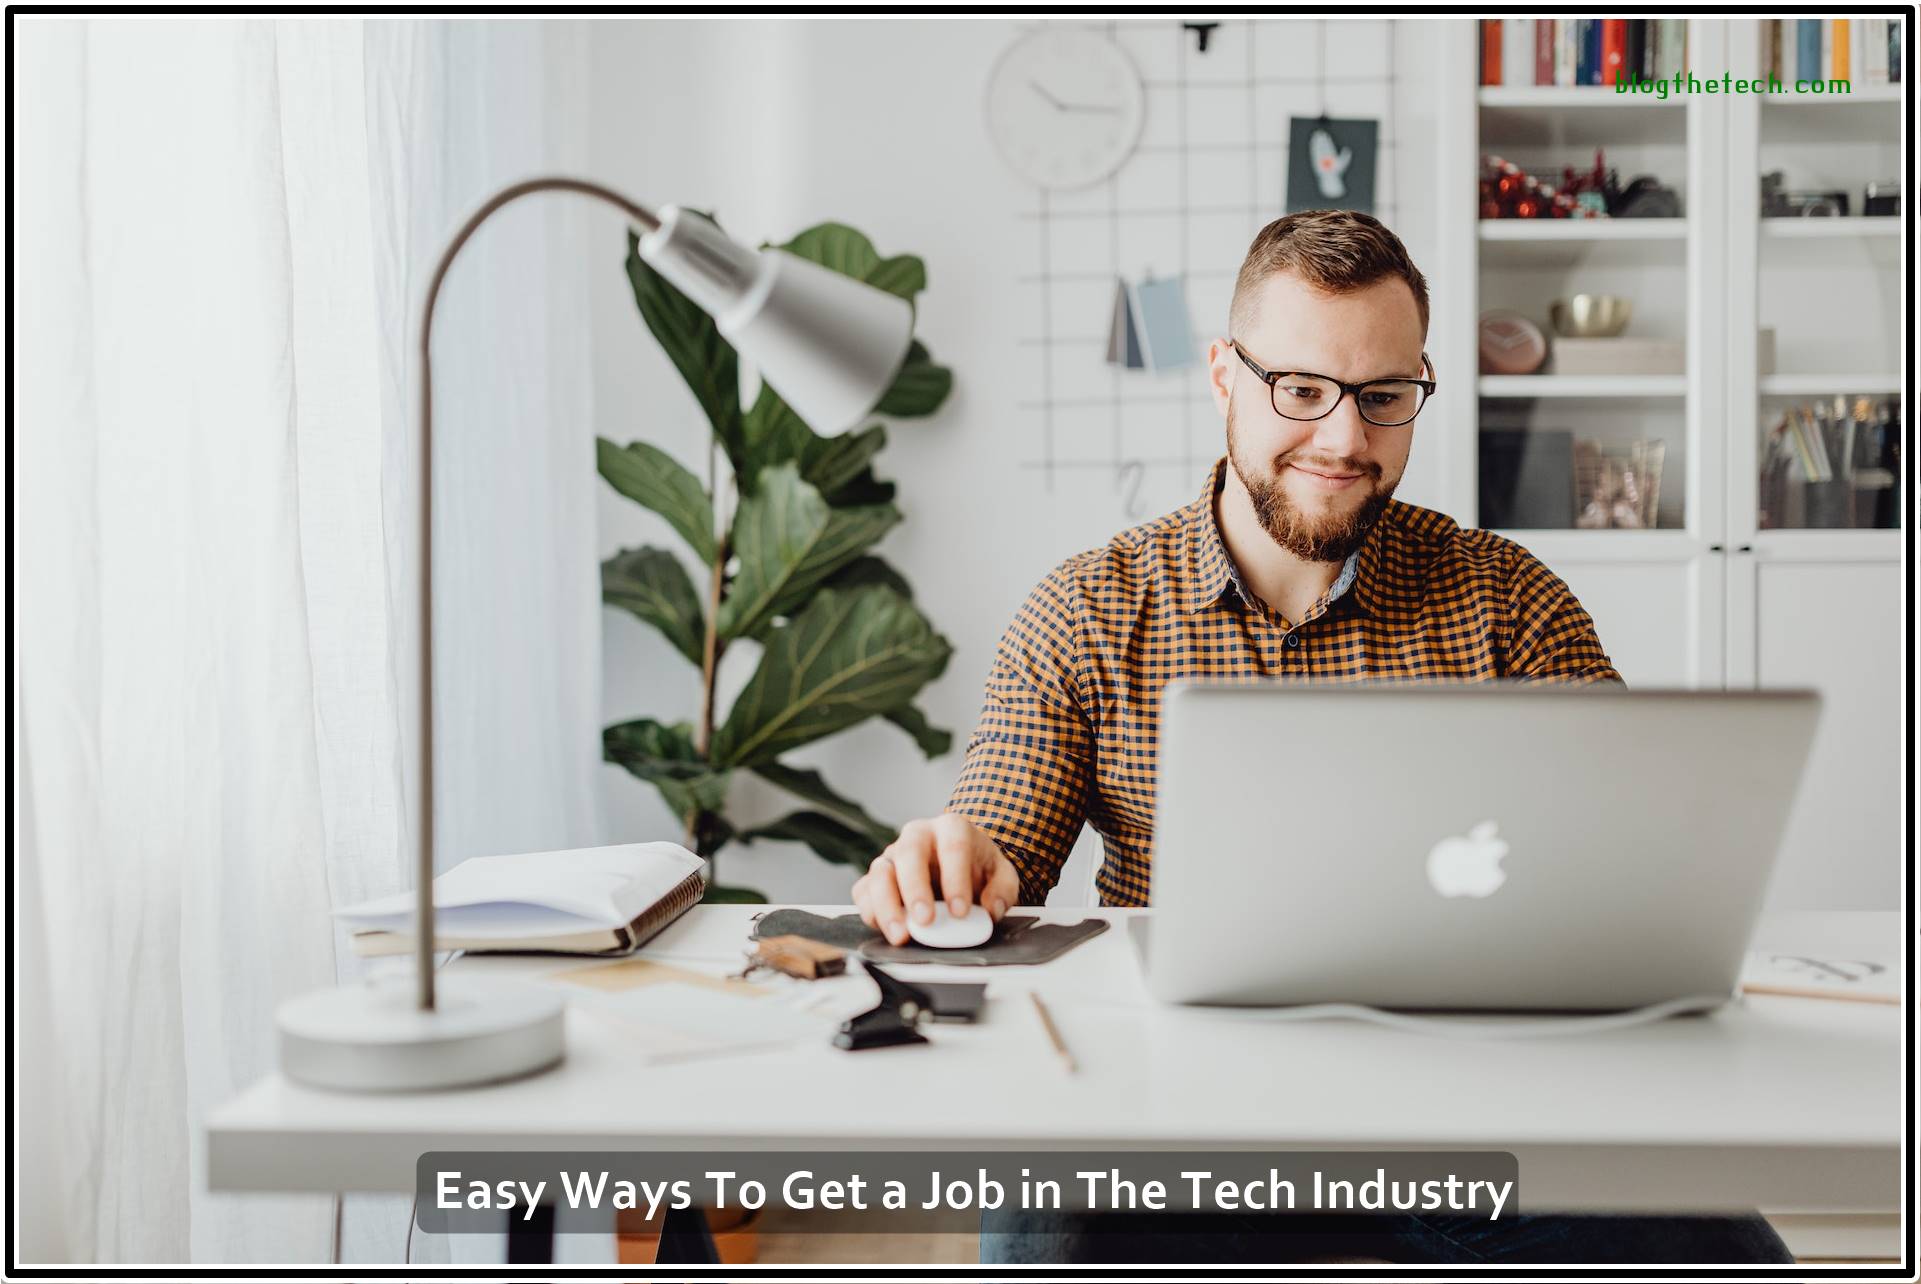 Easy Ways To Get a Job in The Tech Industry